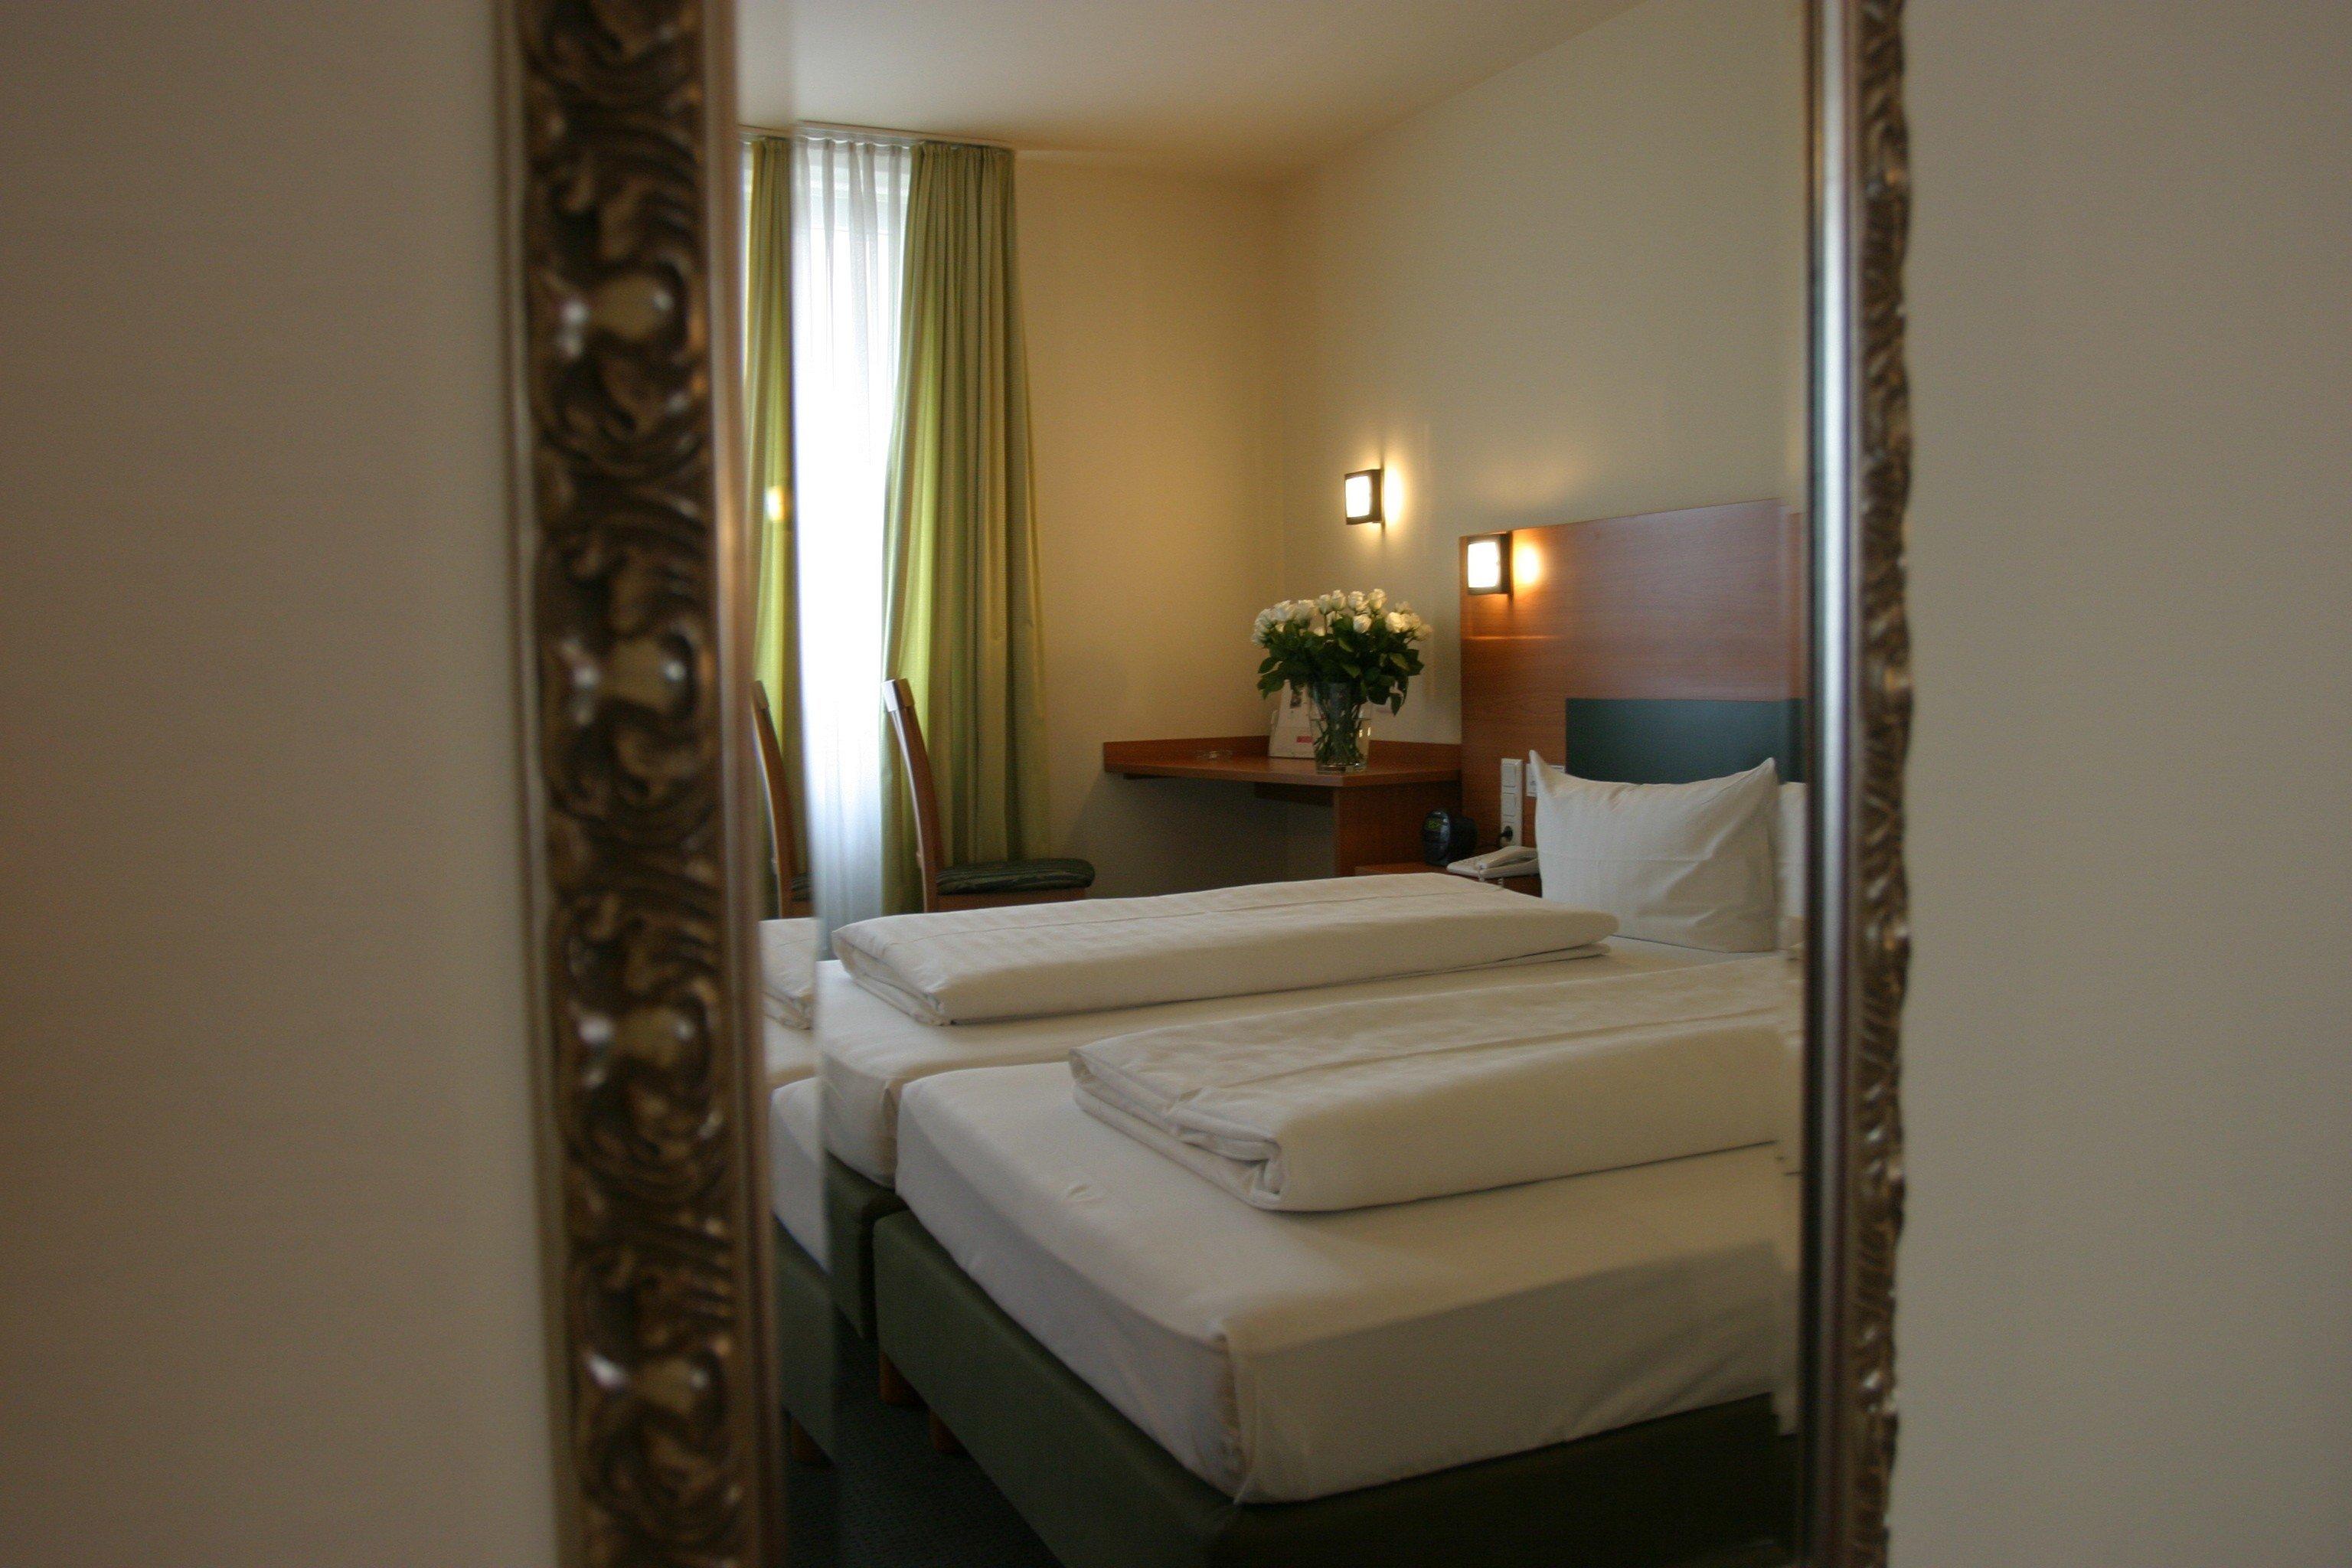 Each of our elaborate guest rooms features shower or bath, private facilities, cable-TV, clock radio, work desk, telephone with voice Mail, partly modem/data port connections, minibar, soundproof windows, windows that can be opened, hair dryer, W-LAN and safety box. The hotel was renovated in May 2011.